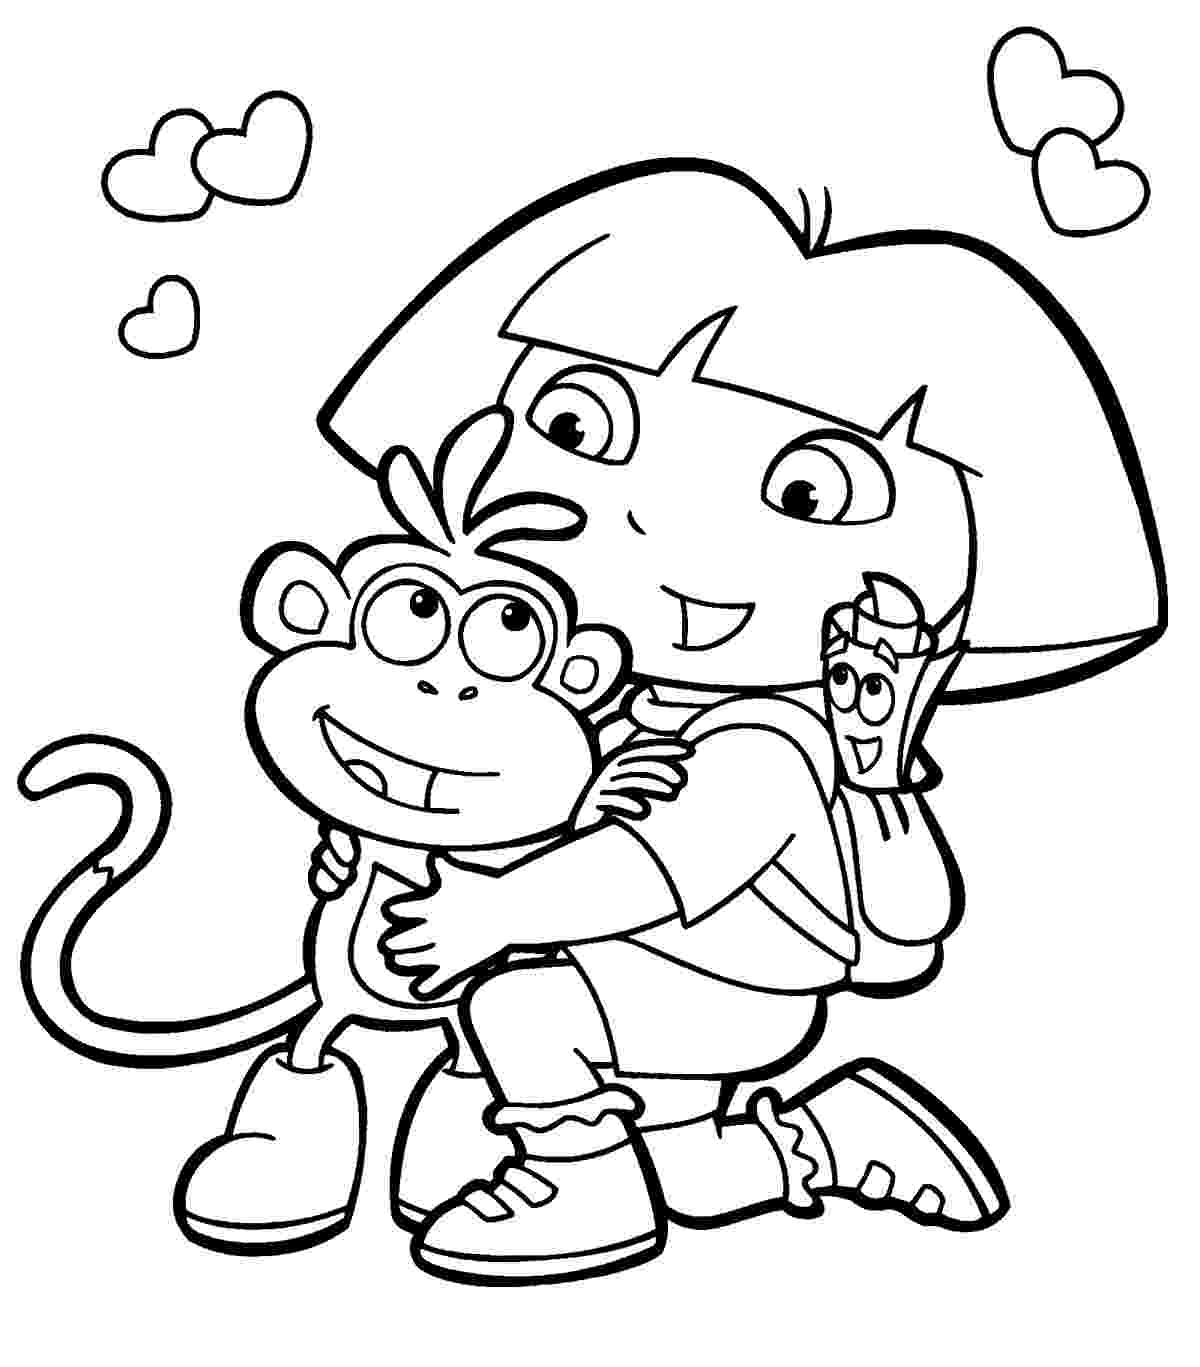 coloring pages dora the explorer free printable dora the explorer coloring pages for kids dora pages the coloring explorer 